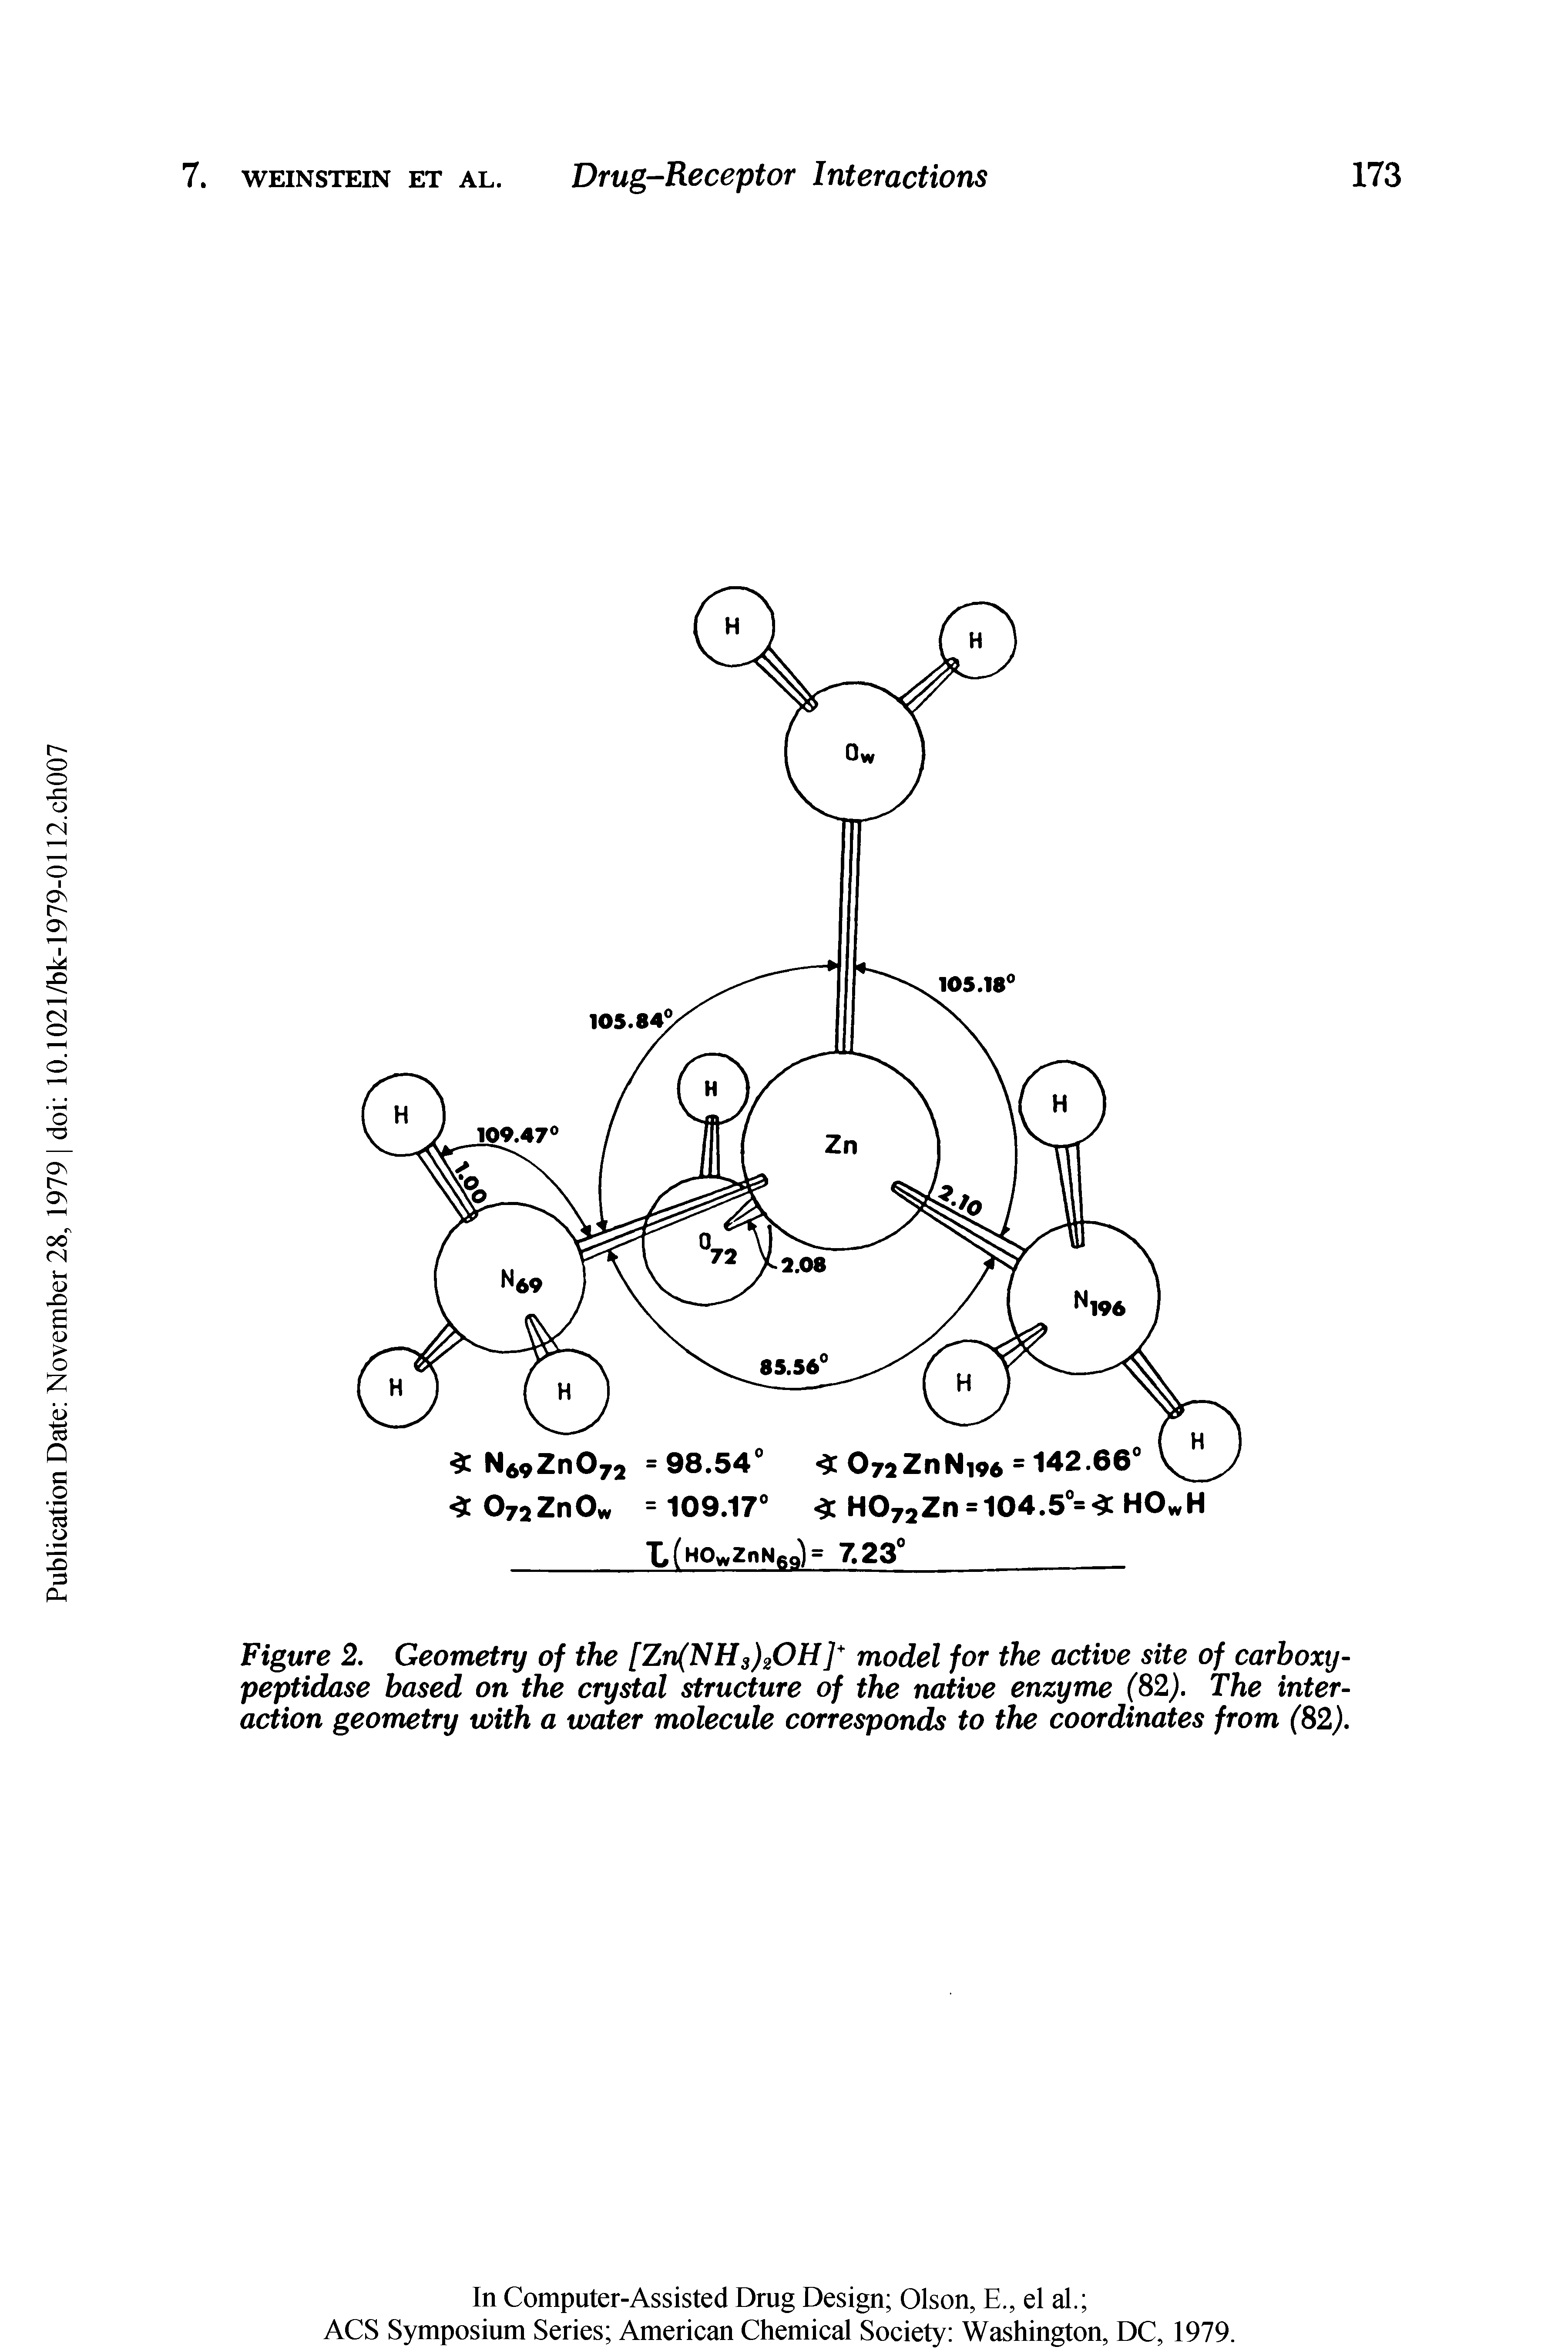 Figure 2. Geometry of the [Zn(NH3)20H] model for the active site of carboxy-peptidase based on the crystal structure of the native enzyme (82). The interaction geometry with a water molecule corresponds to the coordinates from (82).